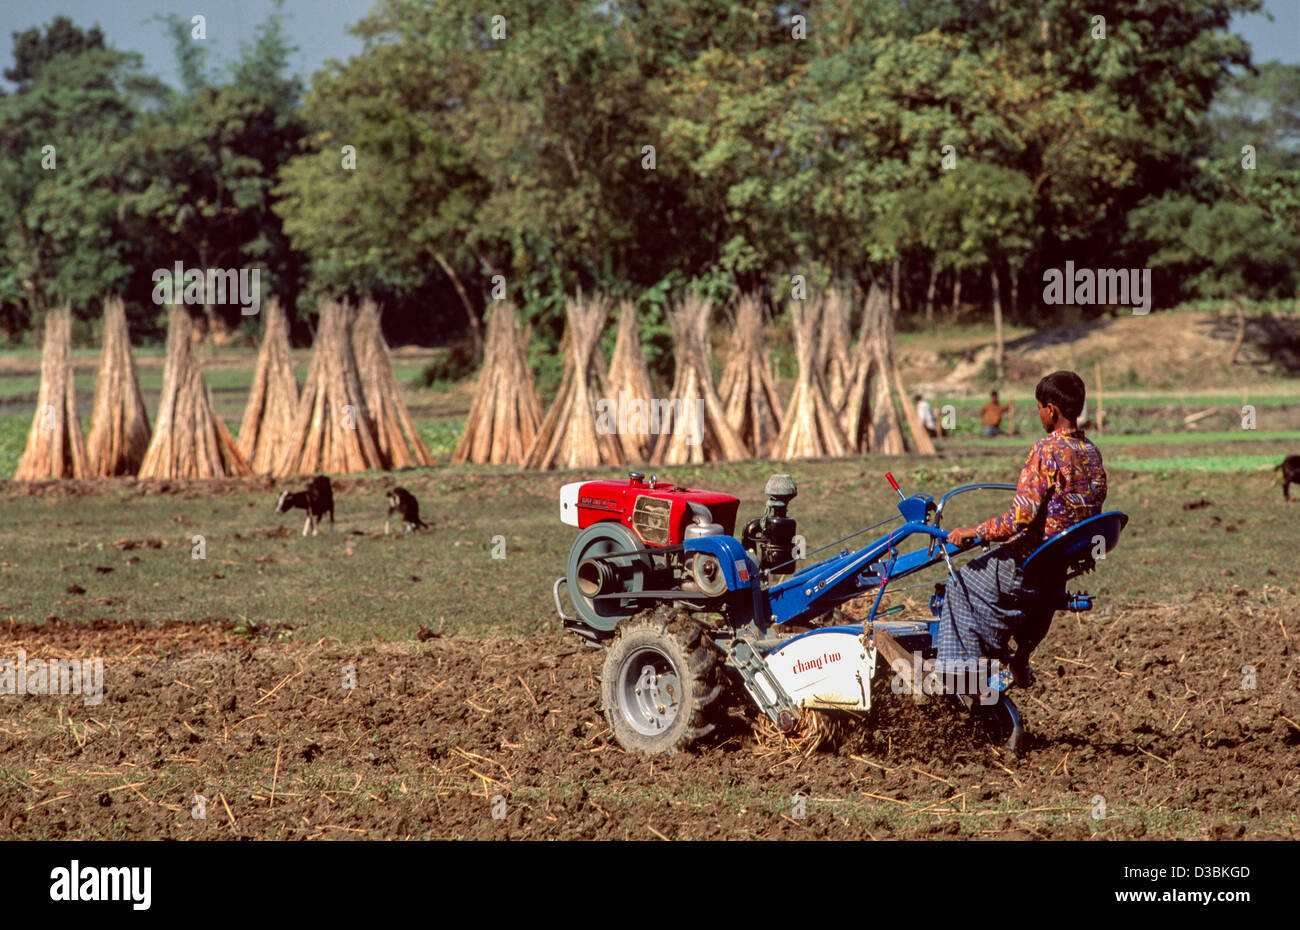 Young farm worker tilling the land with a Chinese petrol driven rotavator. Stacked in the background are jute sticks. Bangladesh Stock Photo